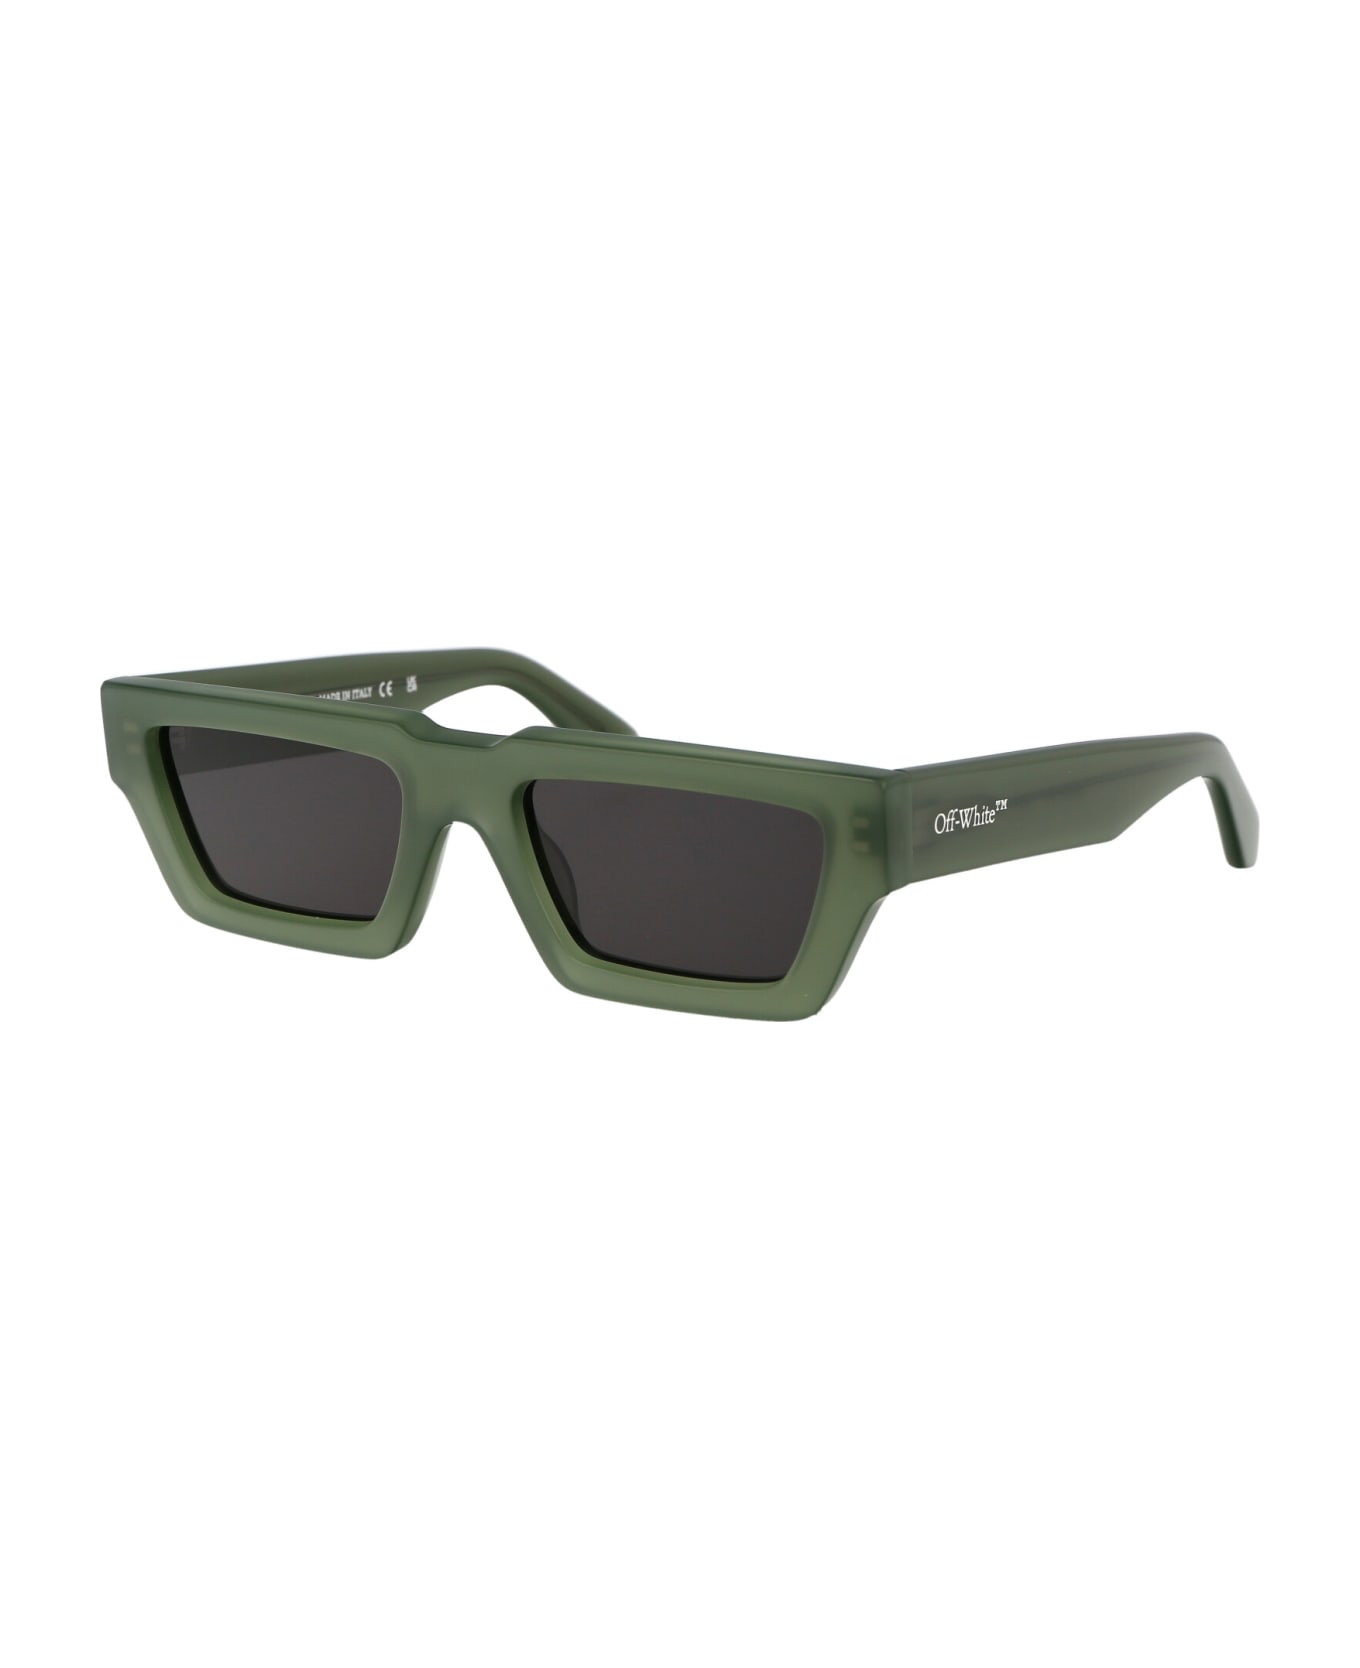 Off-White Manchester Sunglasses - 5707 SAGE GREEN